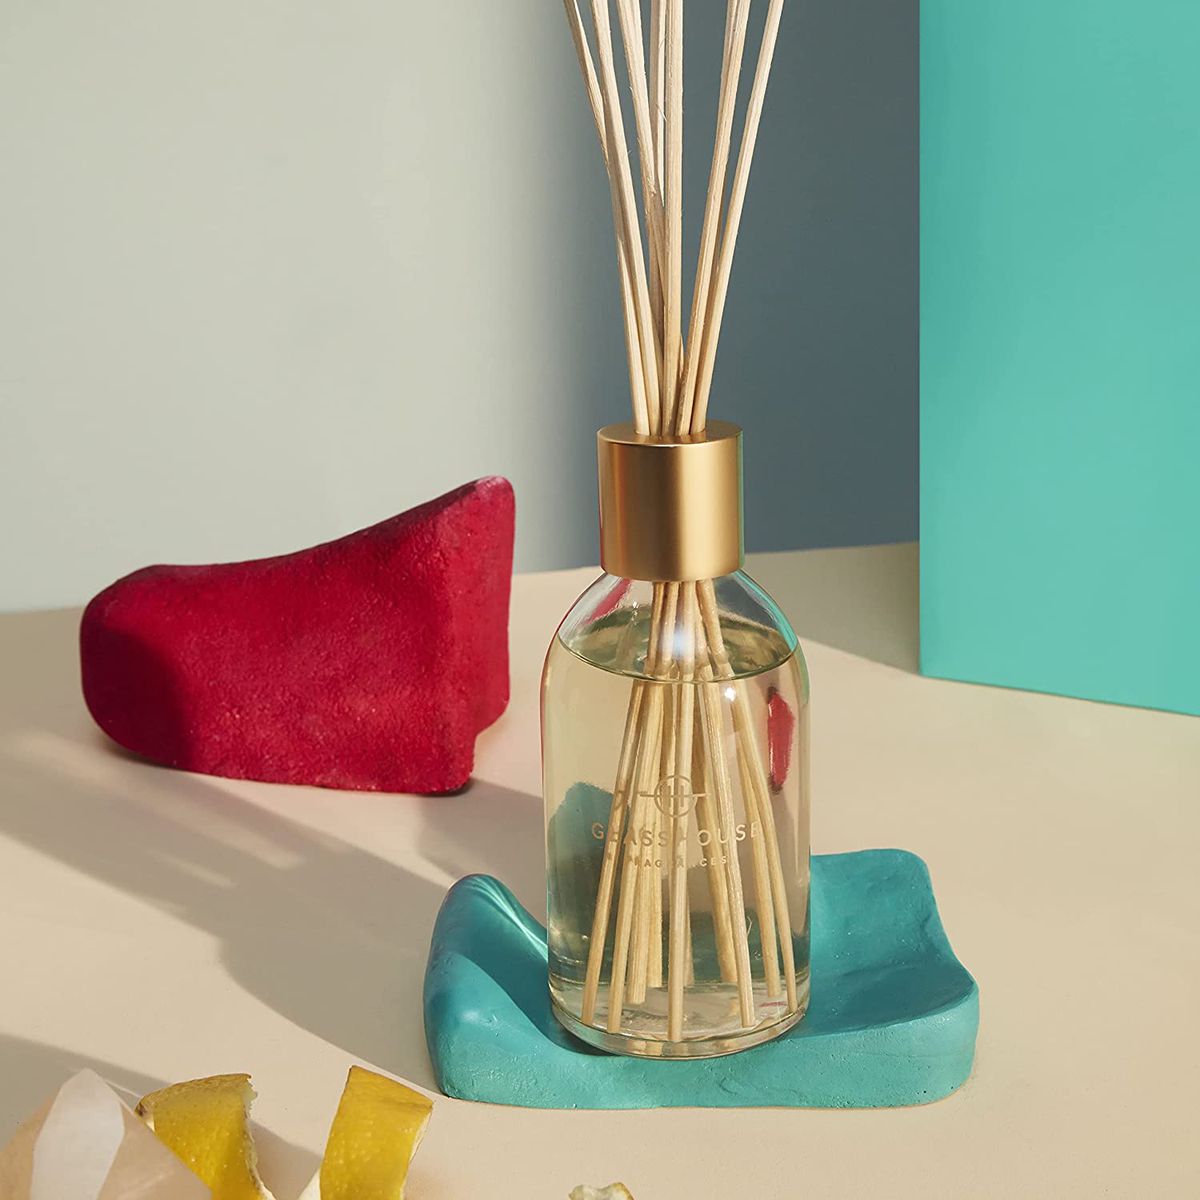 Glasshouse Fragrances Reed Diffuser